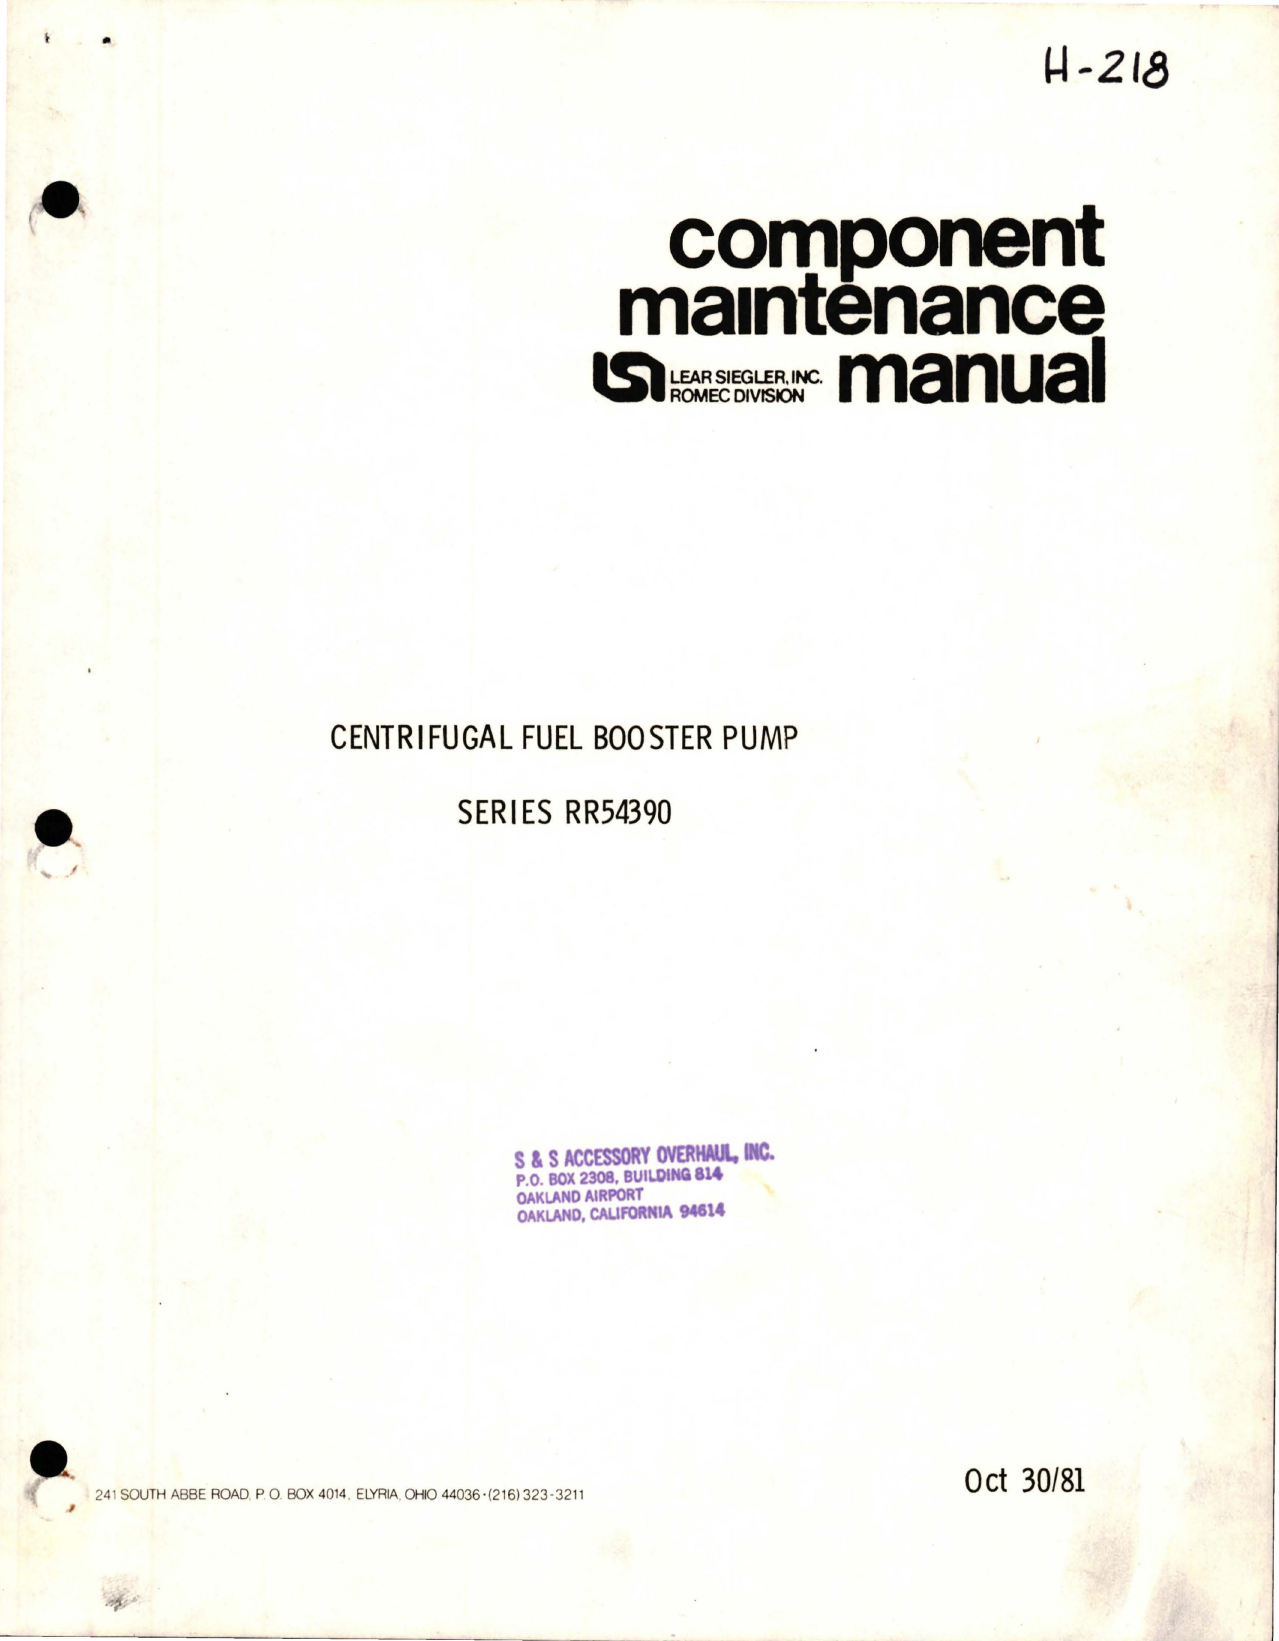 Sample page 1 from AirCorps Library document: Maintenance Manual for Centrifugal Fuel Booster Pump - Series RR54390